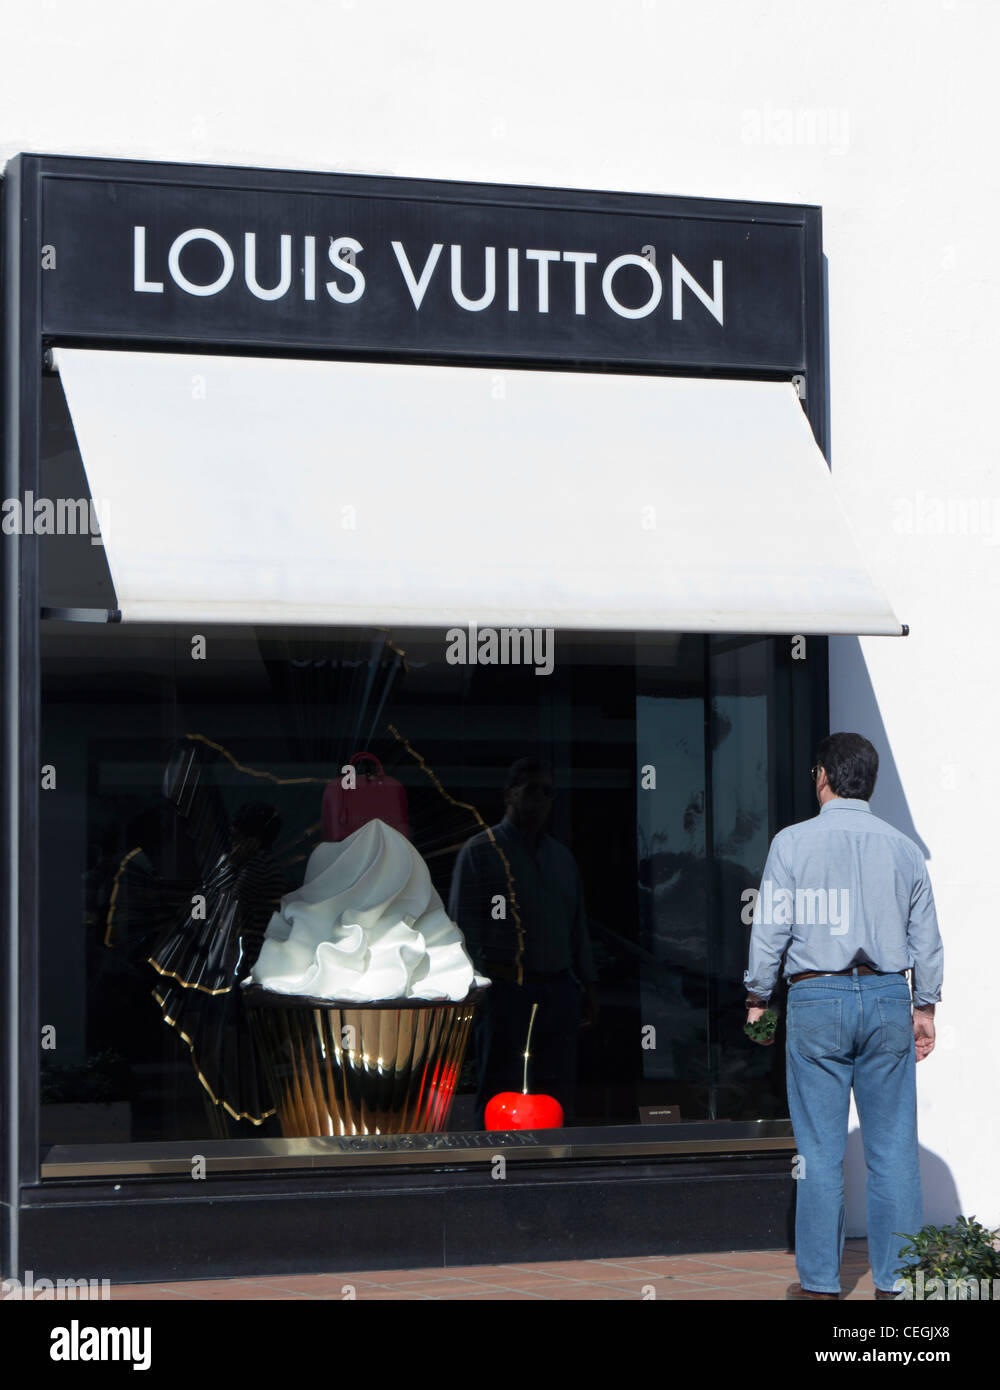 Louis vuitton shop marbella hi-res stock photography and images